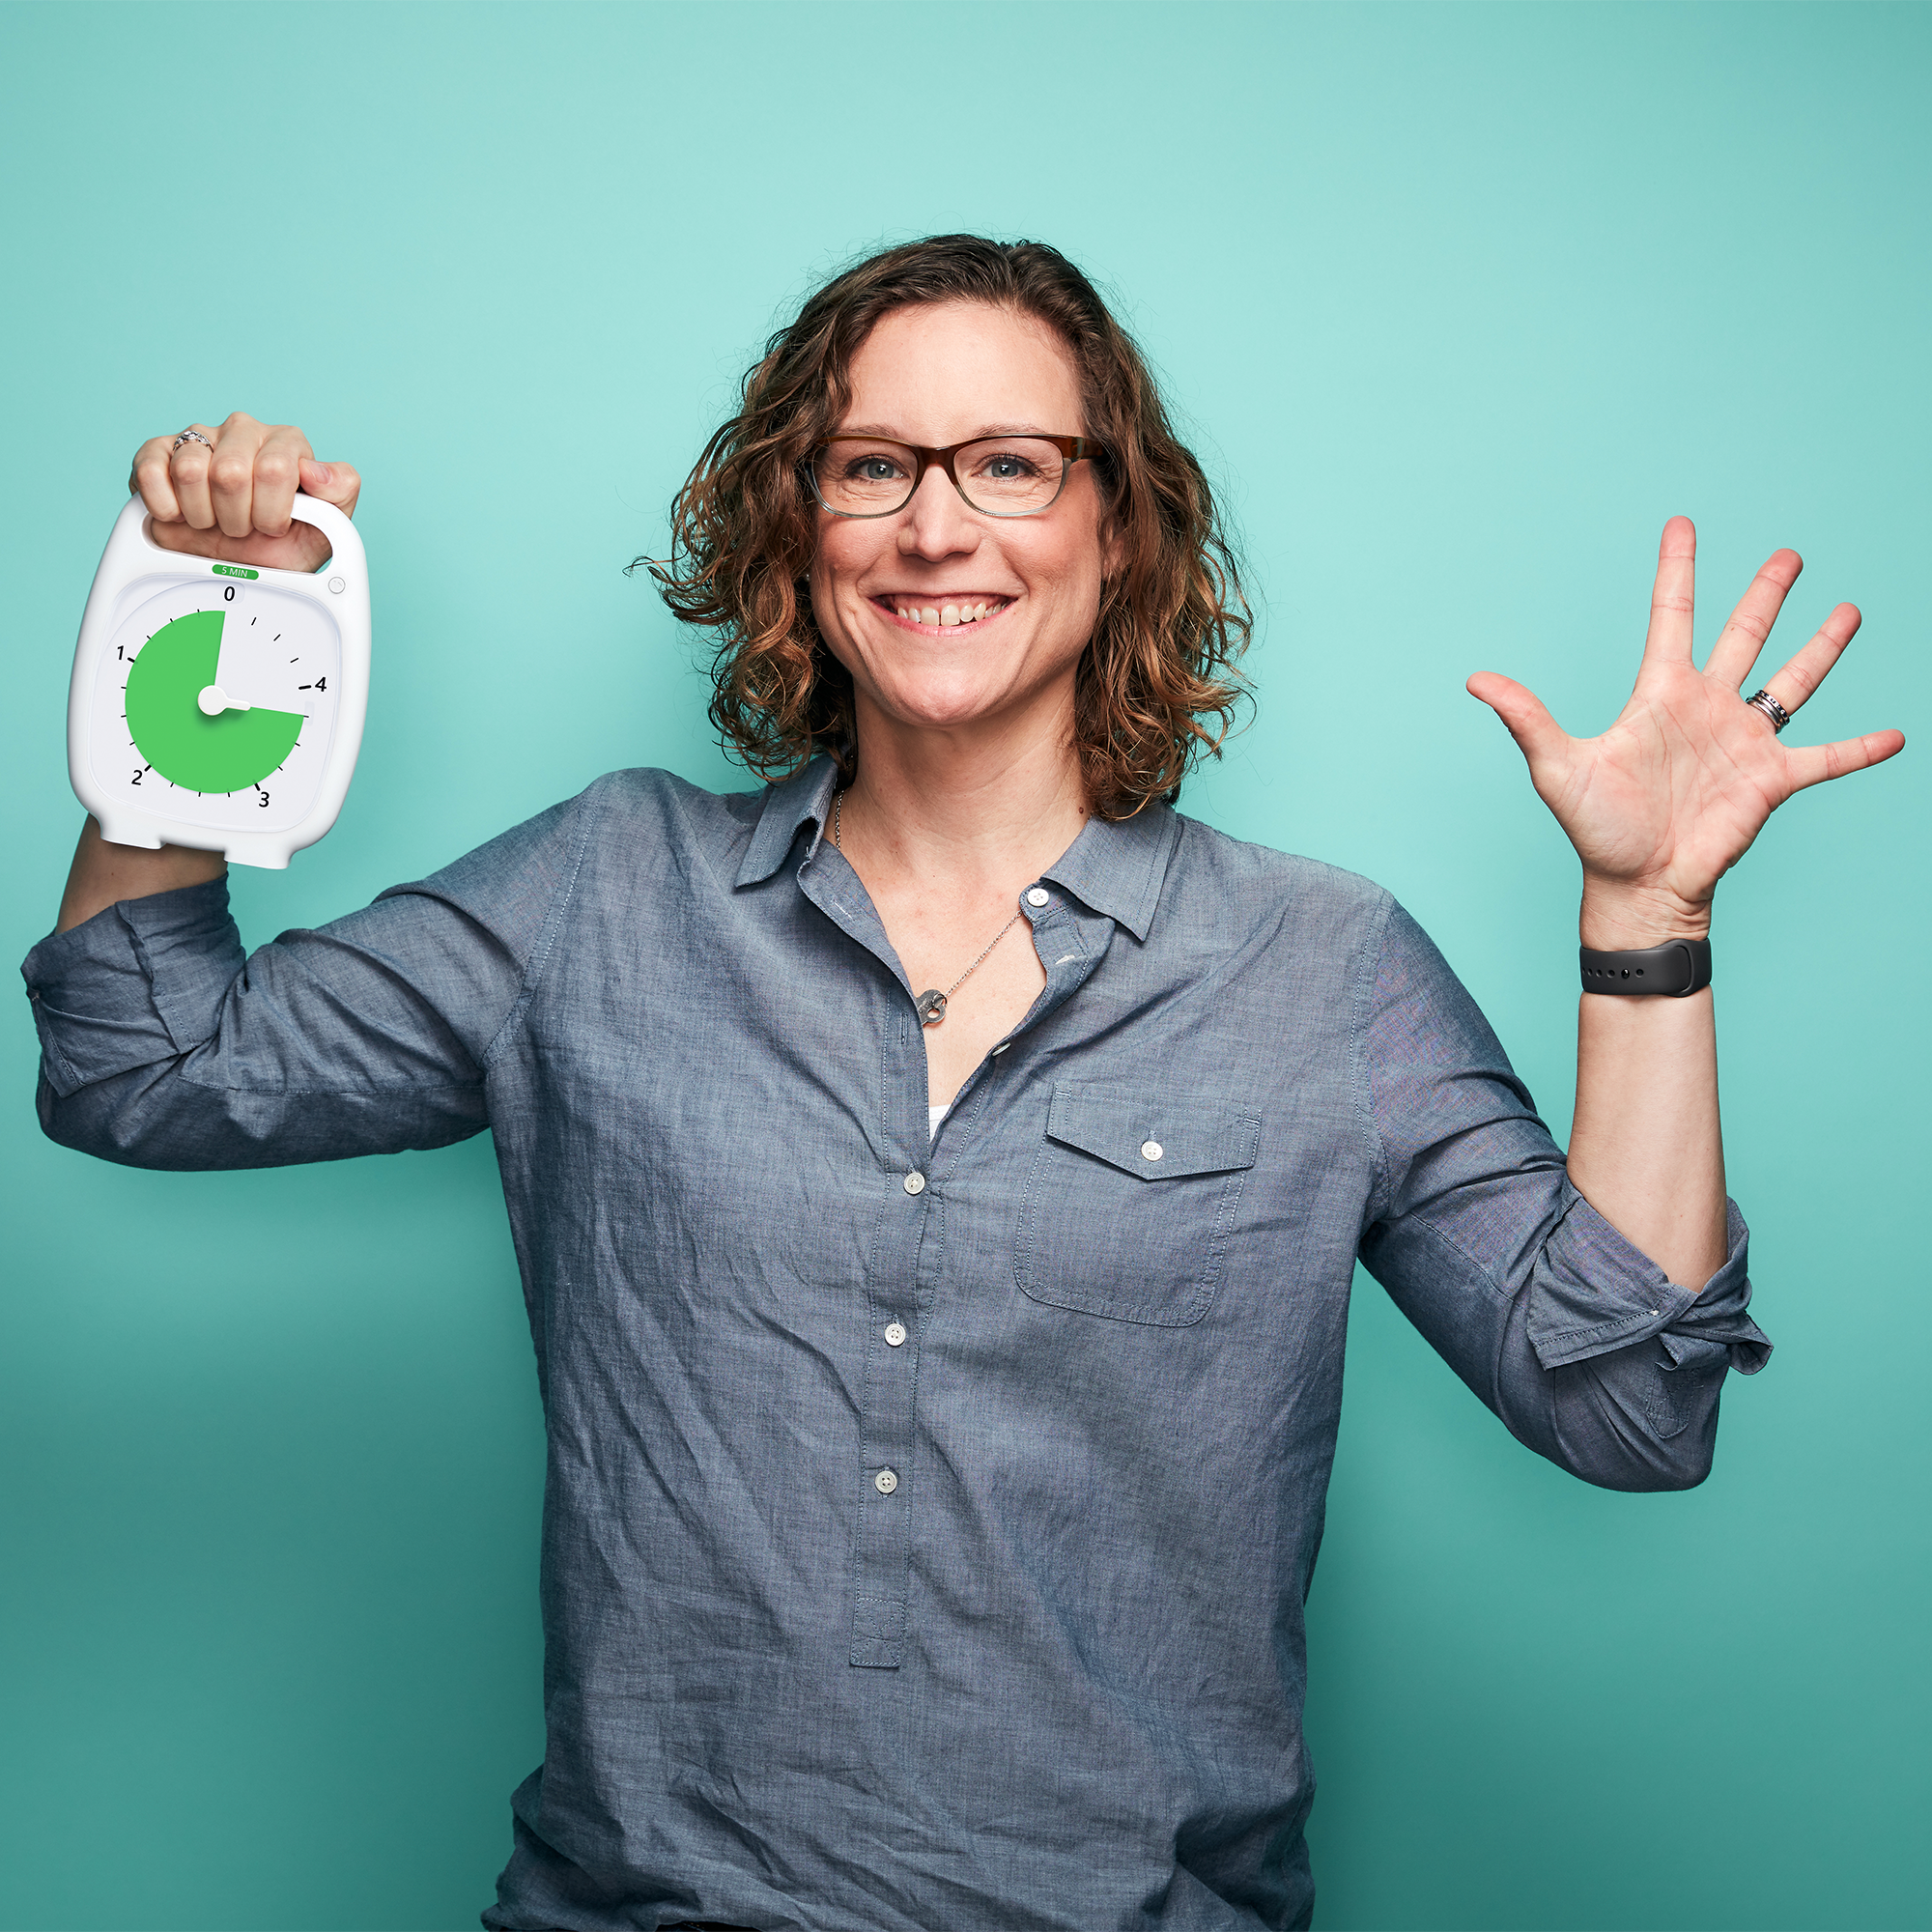 A smiling woman is standing in front of a light blue background. She is holding the Time Timer PLUS 5 minute visual timer in one hand, and holding up 5 fingers with her other hand. The green disk of the timer is displaying 3 minutes and 45 seconds.